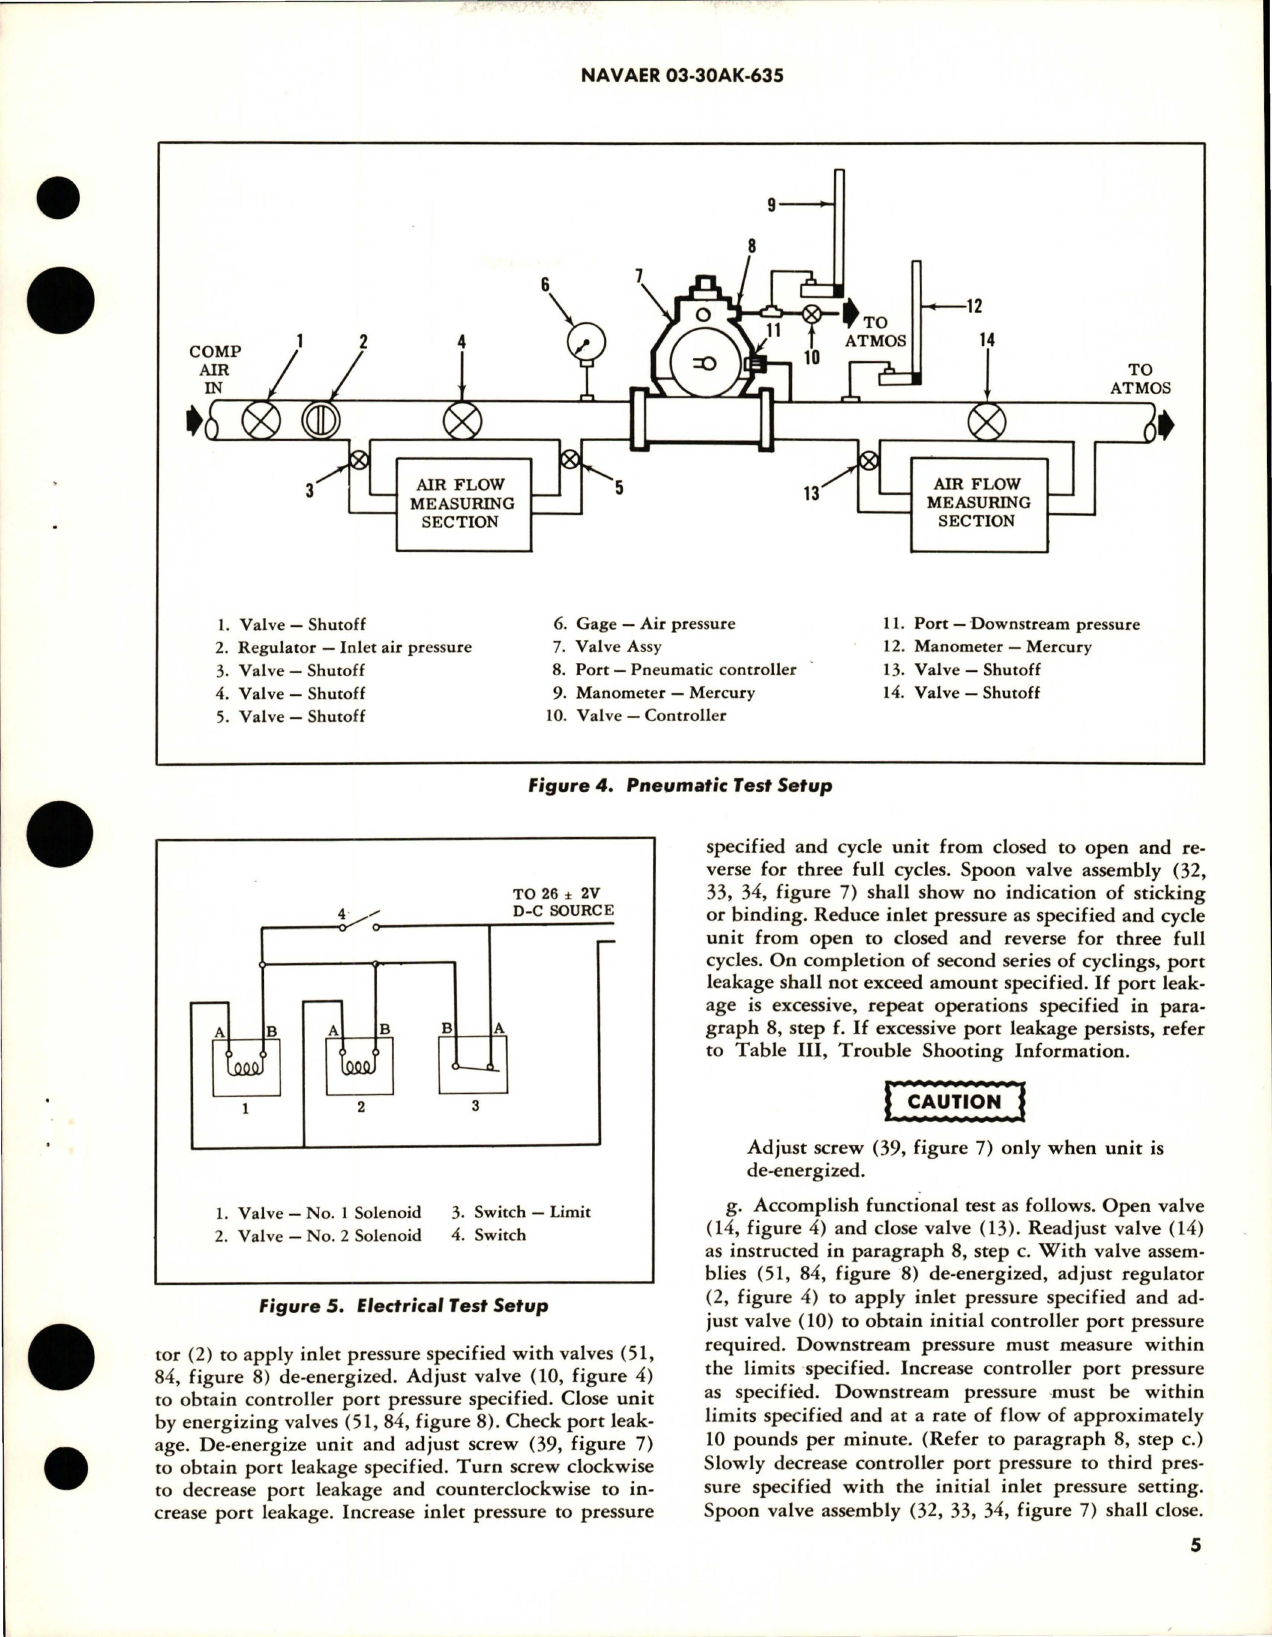 Sample page 5 from AirCorps Library document: Overhaul Instructions with Parts Breakdown for Modulating Pneumatic Shutoff Valves - Parts 108522 and 108522-1 - Models PMV1-1 and PMV1-2 